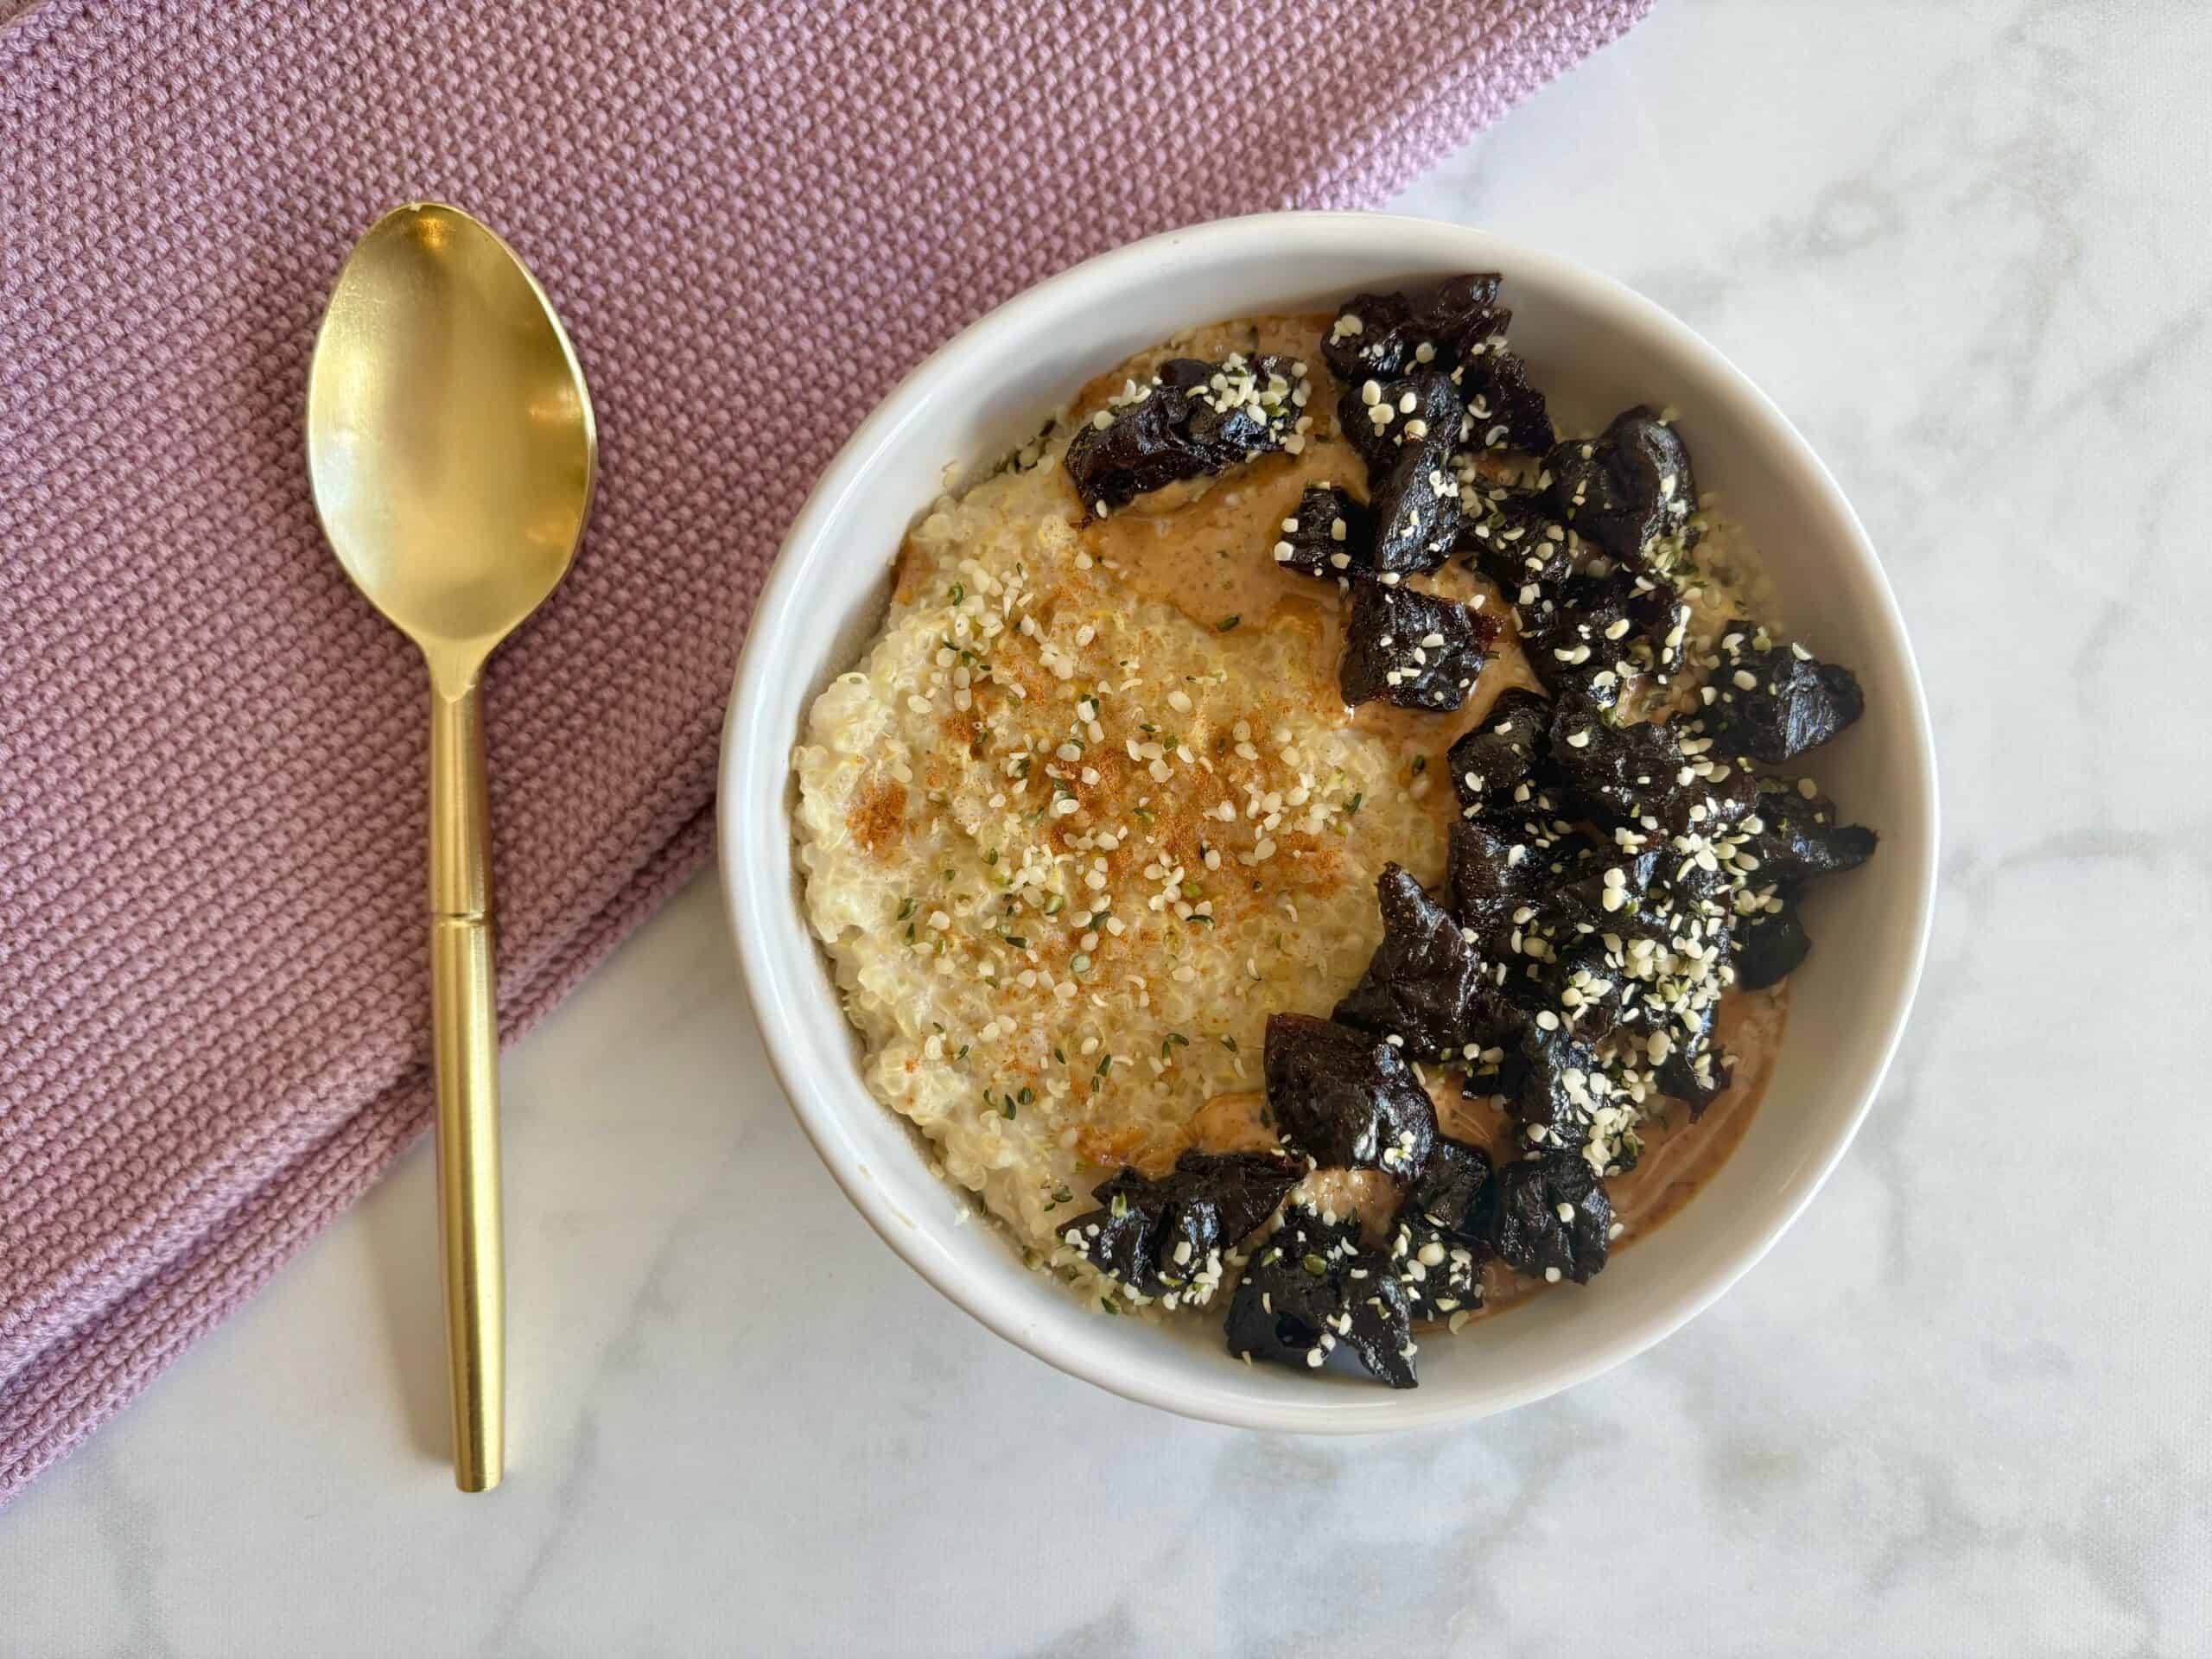 Bowl of porridge topped with prunes and hemp seeds with a golden spoon and purple dish towel underneath